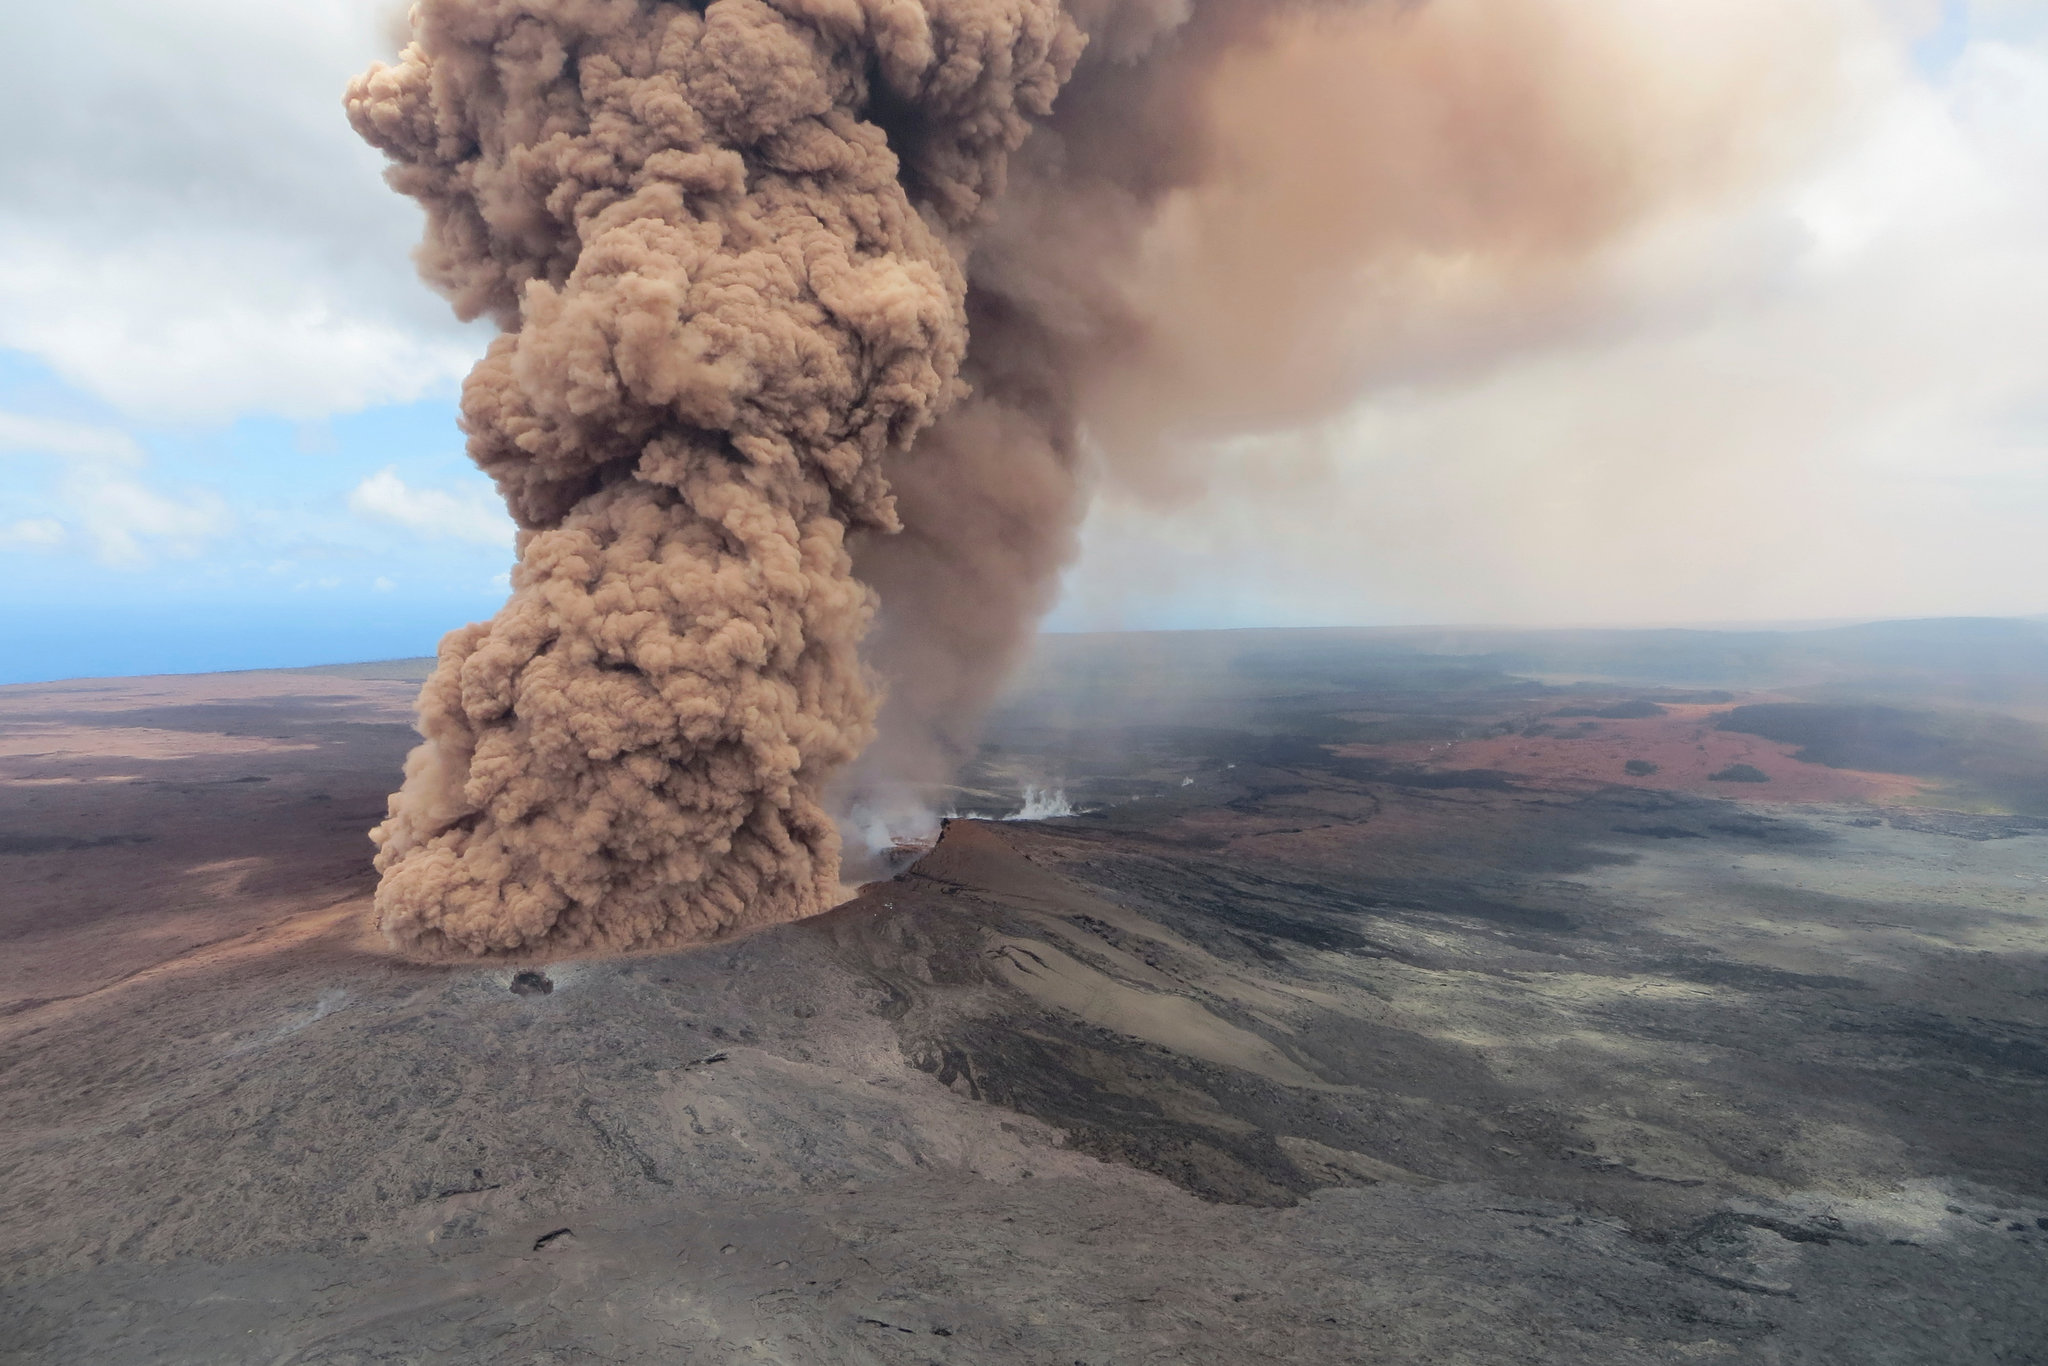 The US has 169 volcanoes that could erupt at any time, including 50